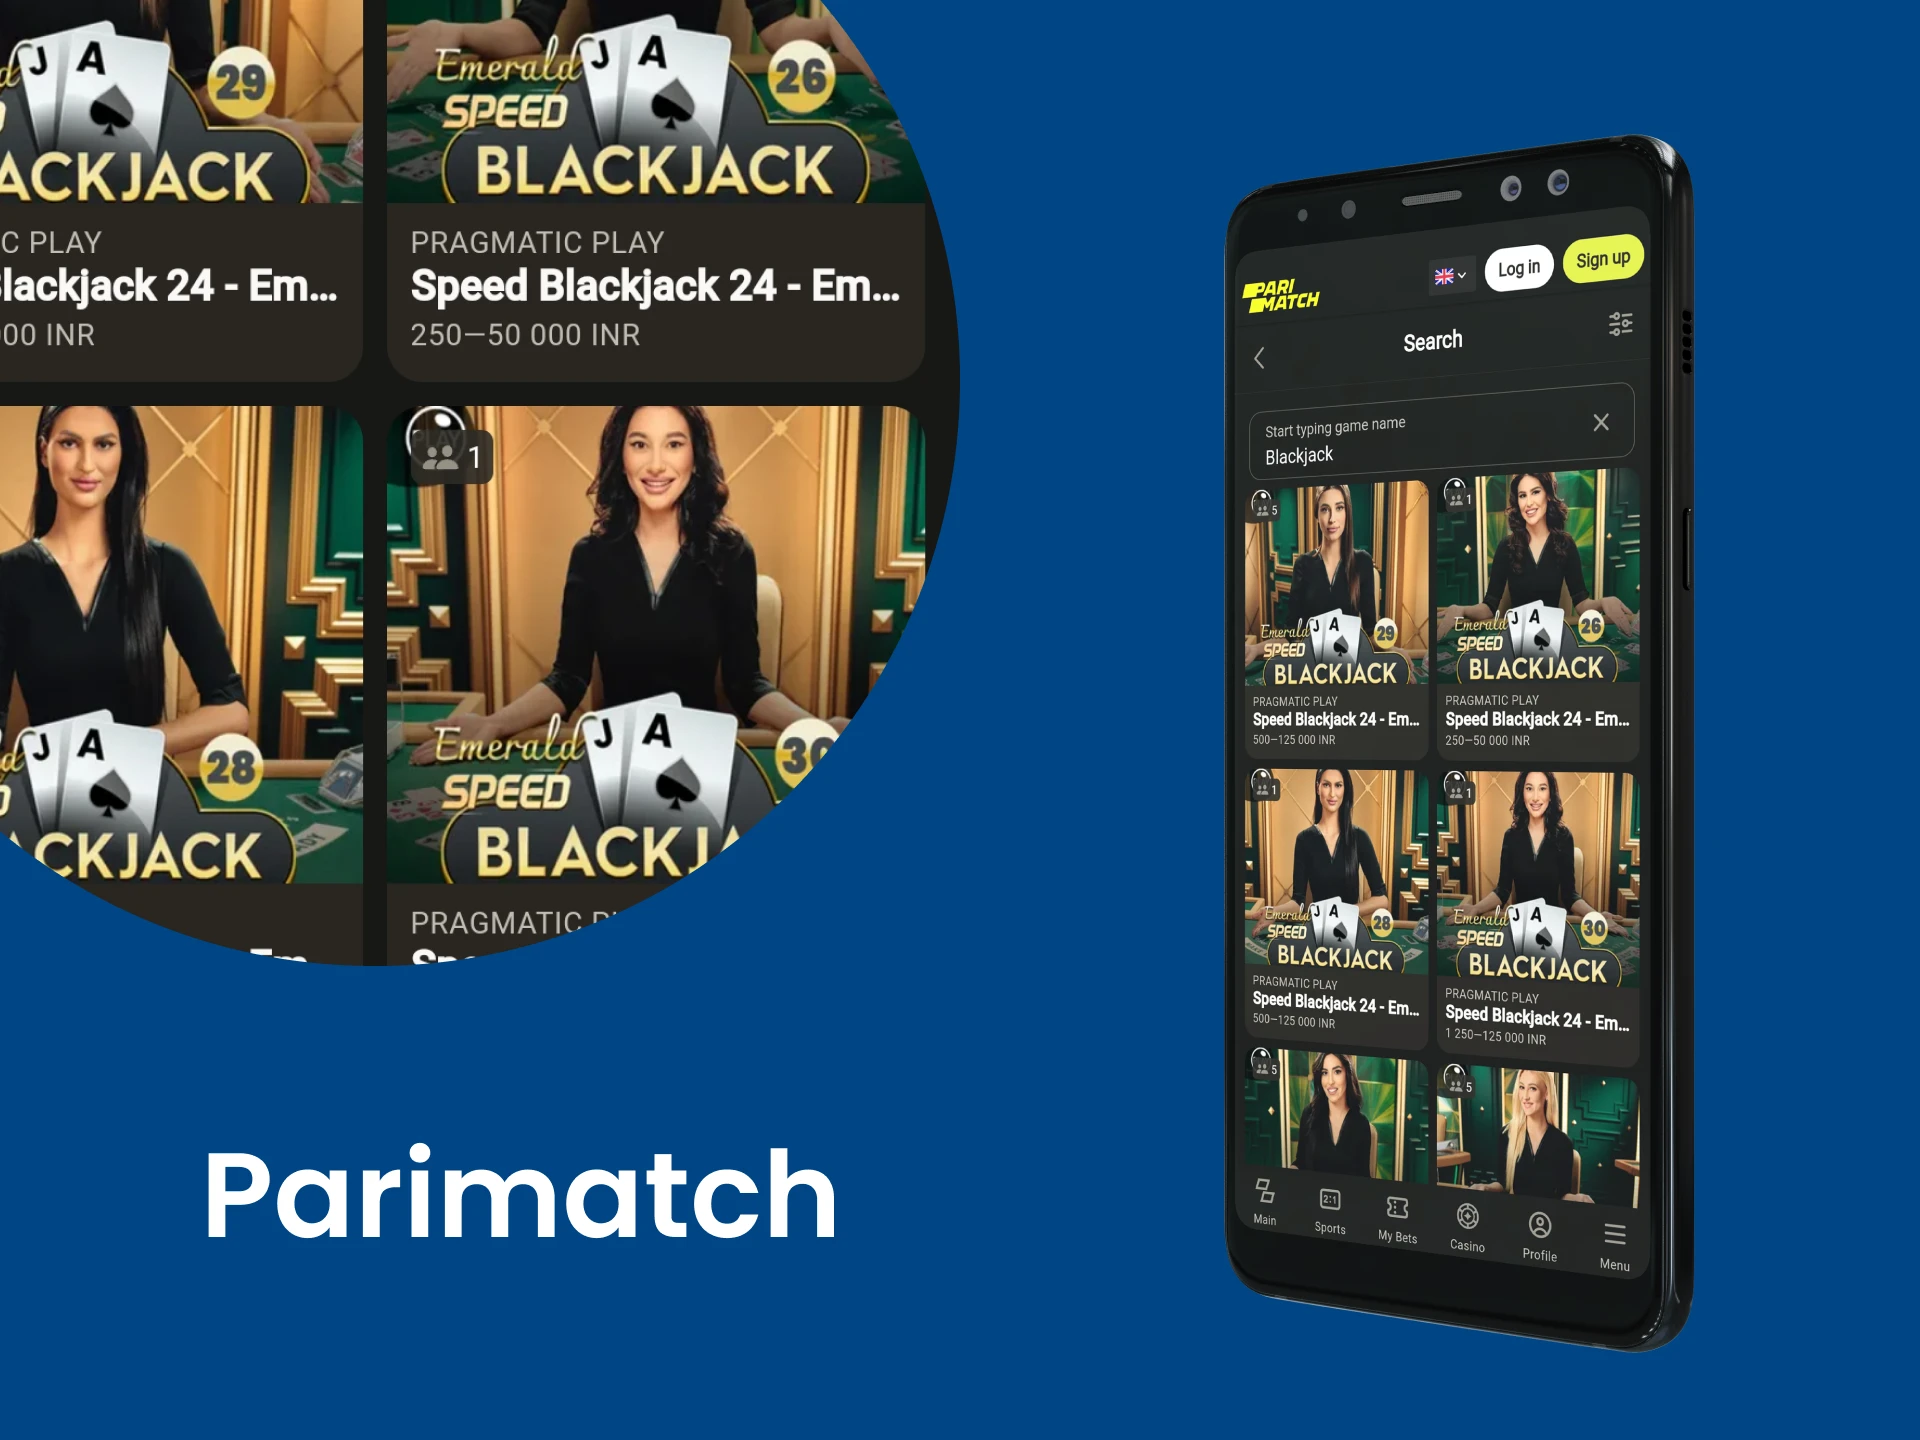 Download the Primatch app to play Blackjack.